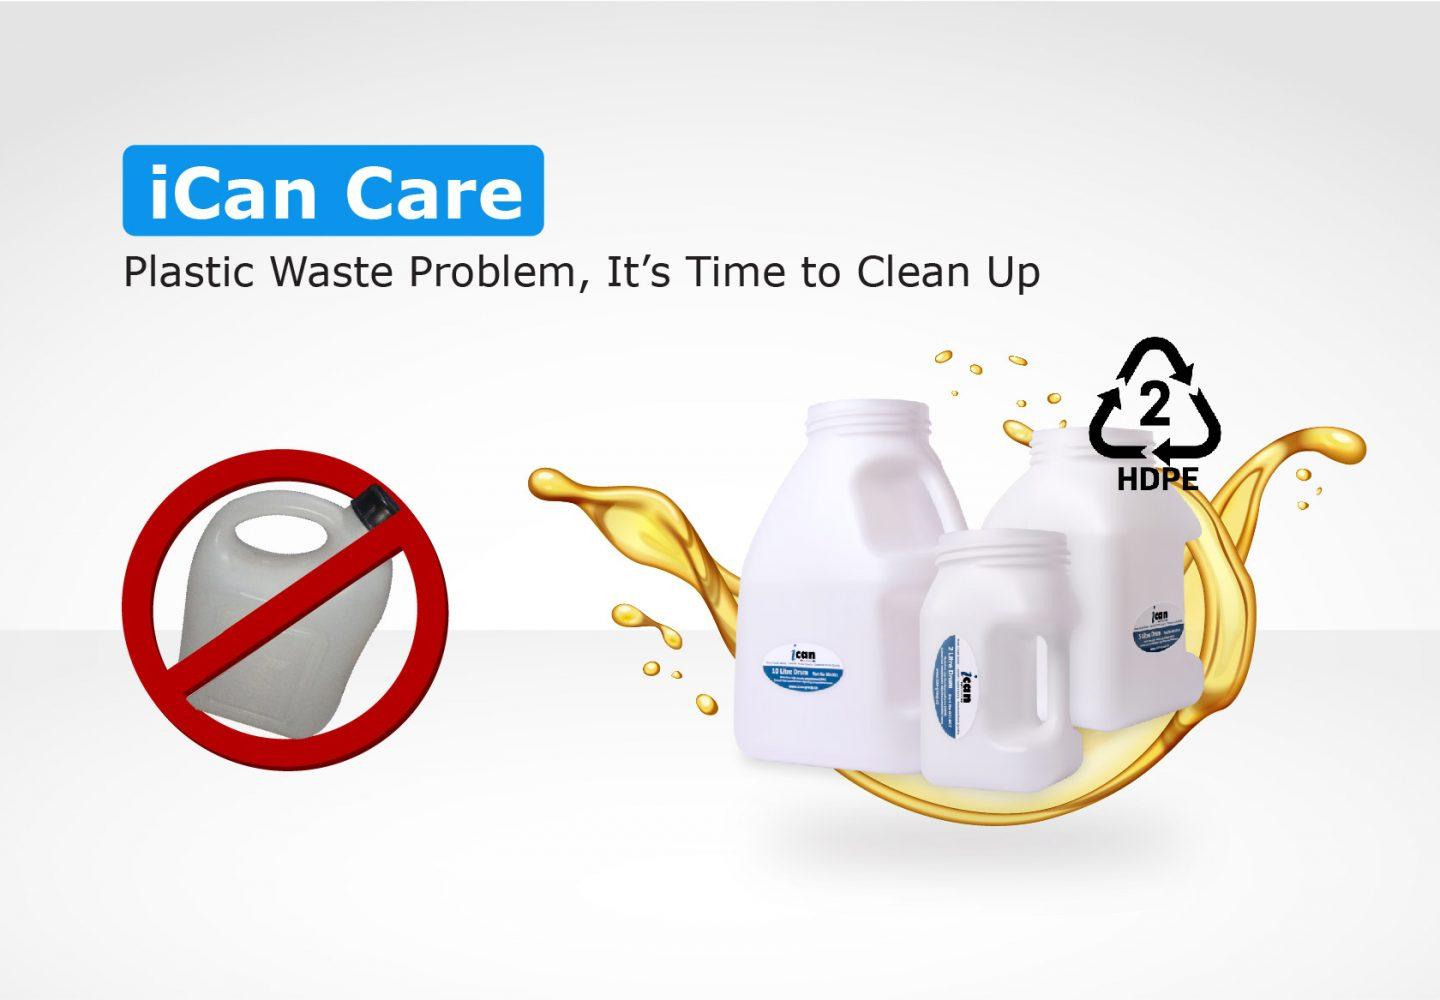 iCan Care: Plastic Waste Problem, It’s Time to Clean Up